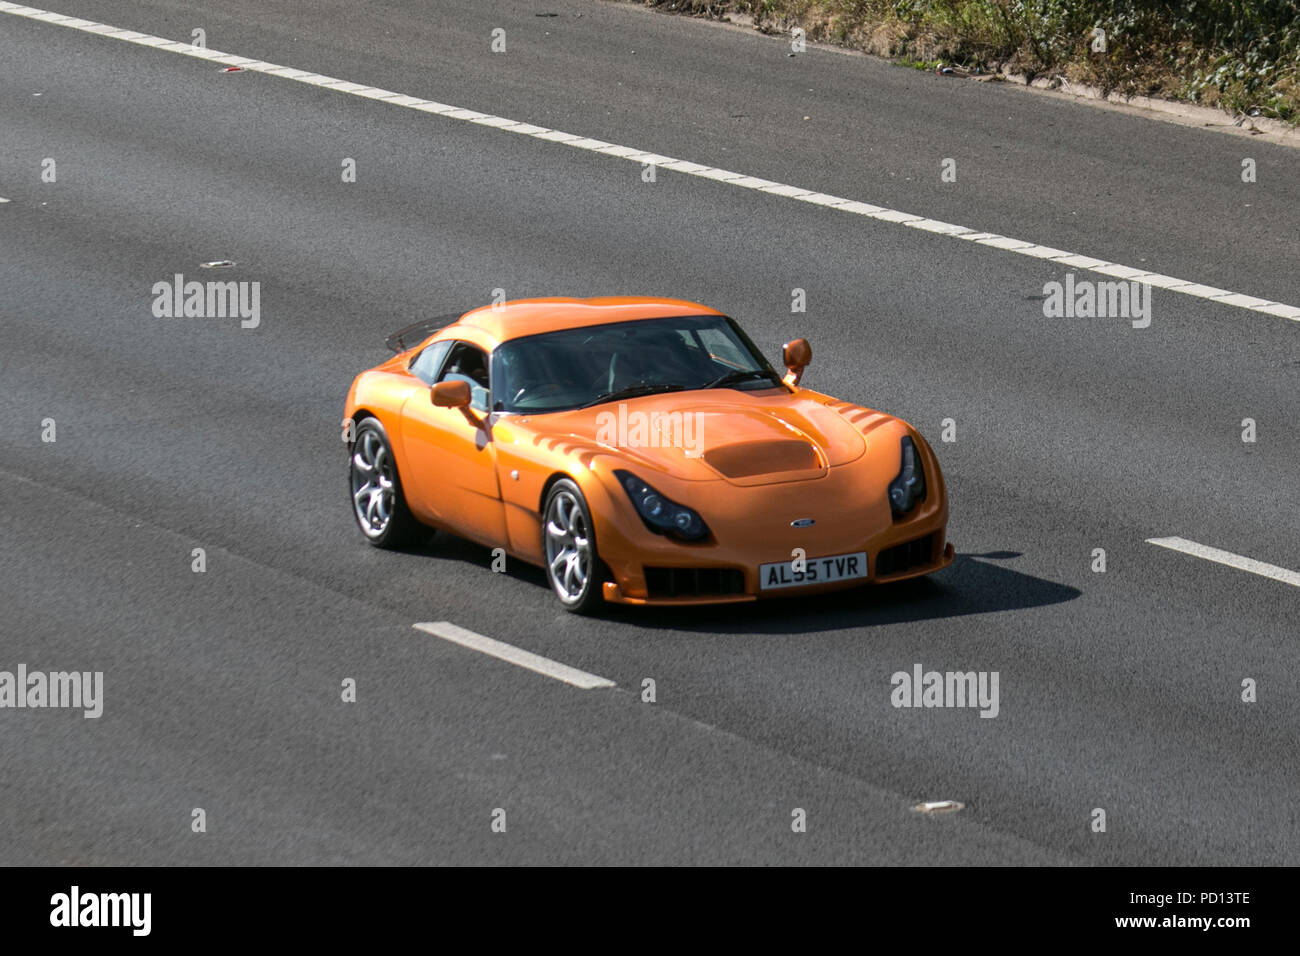 2005 55 plate Orange British Tvr Sagaris 3996cc petrol coupe is a sports car designed and built by the British manufacturer TVR in Blackpool, Lancashire. UK Stock Photo